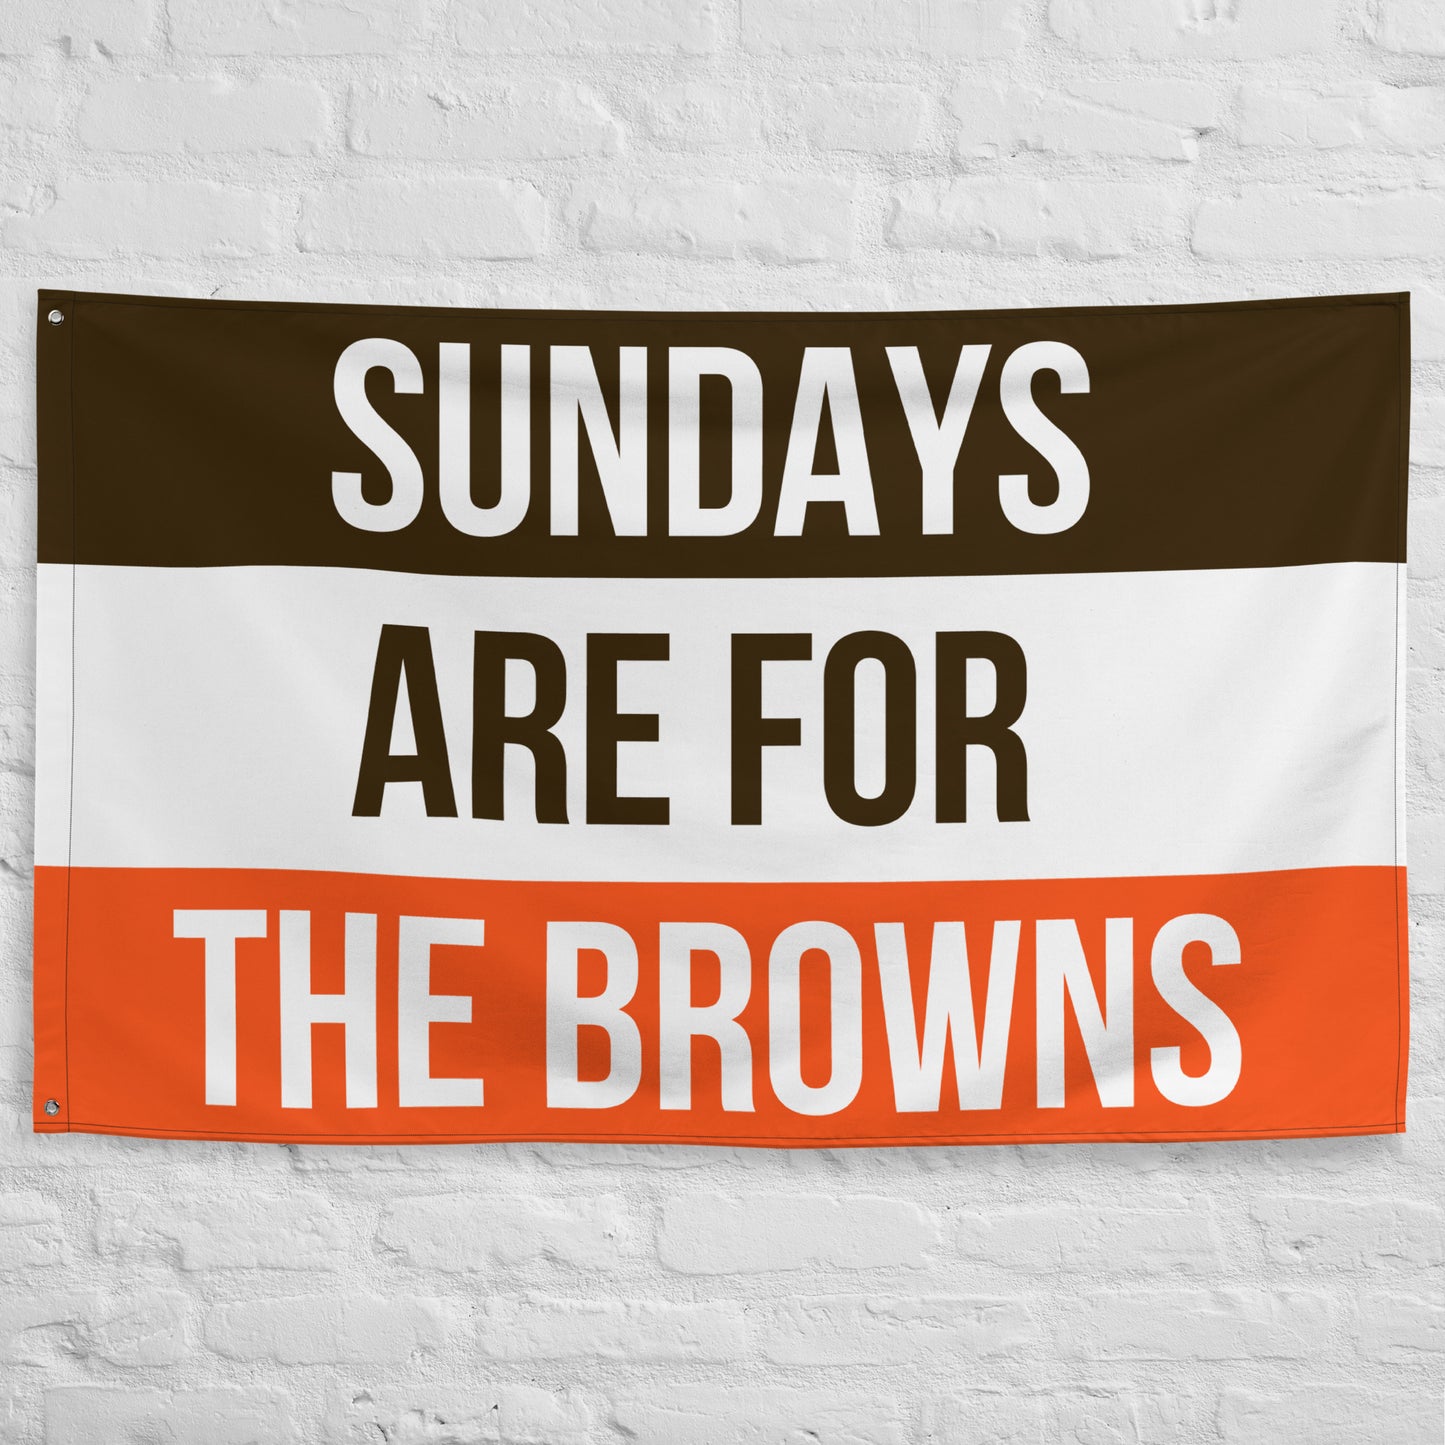 Sundays are for the Browns Flag, Cleveland Browns Flag, Football Tailgate Flag